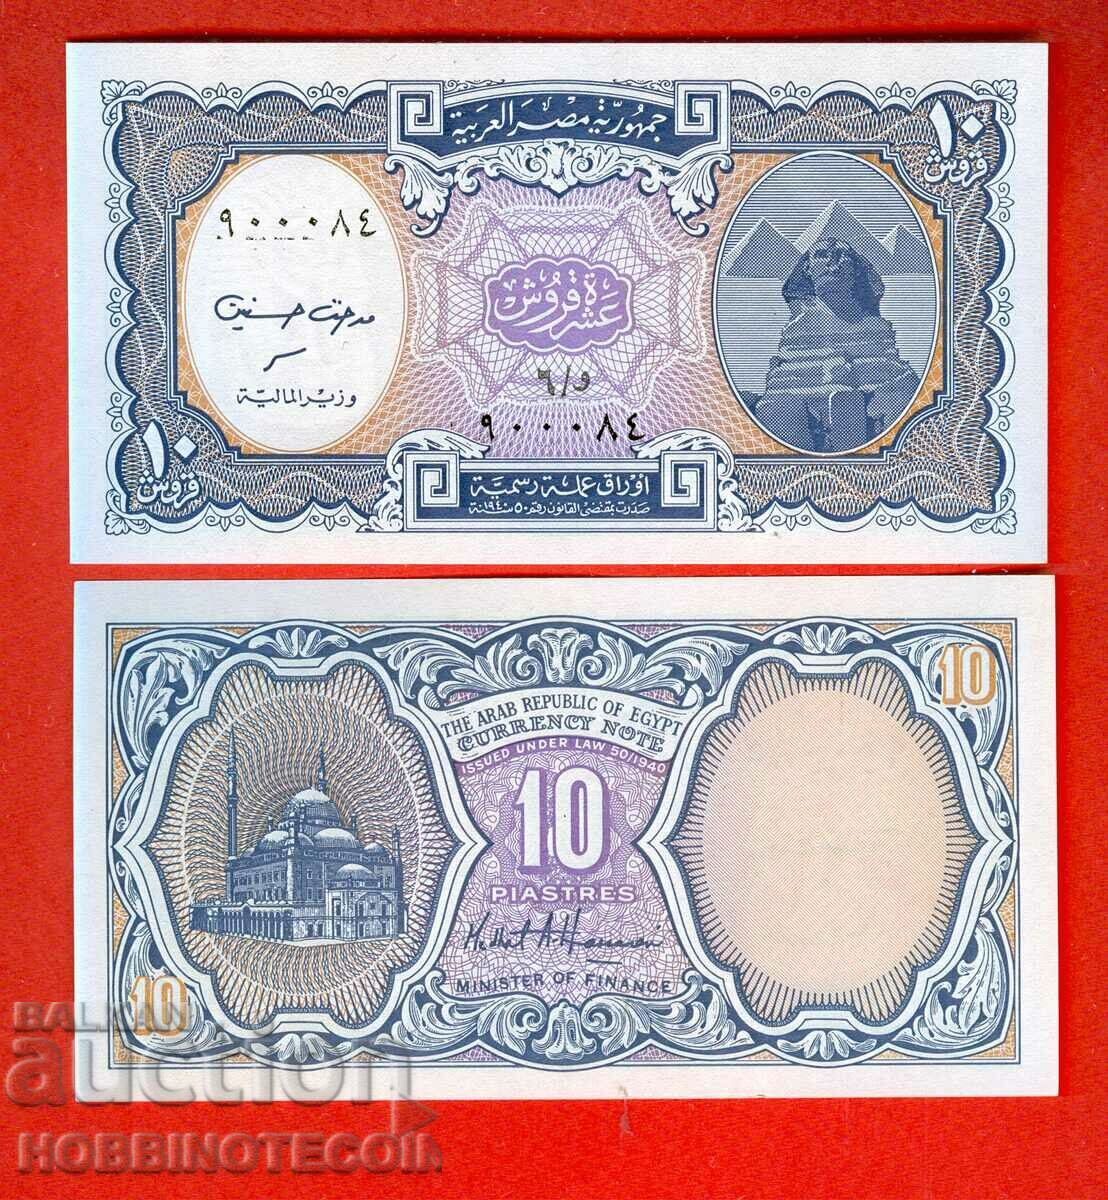 EGYPT EGYPT 10 Piastres issue issue 19** NEW UNC